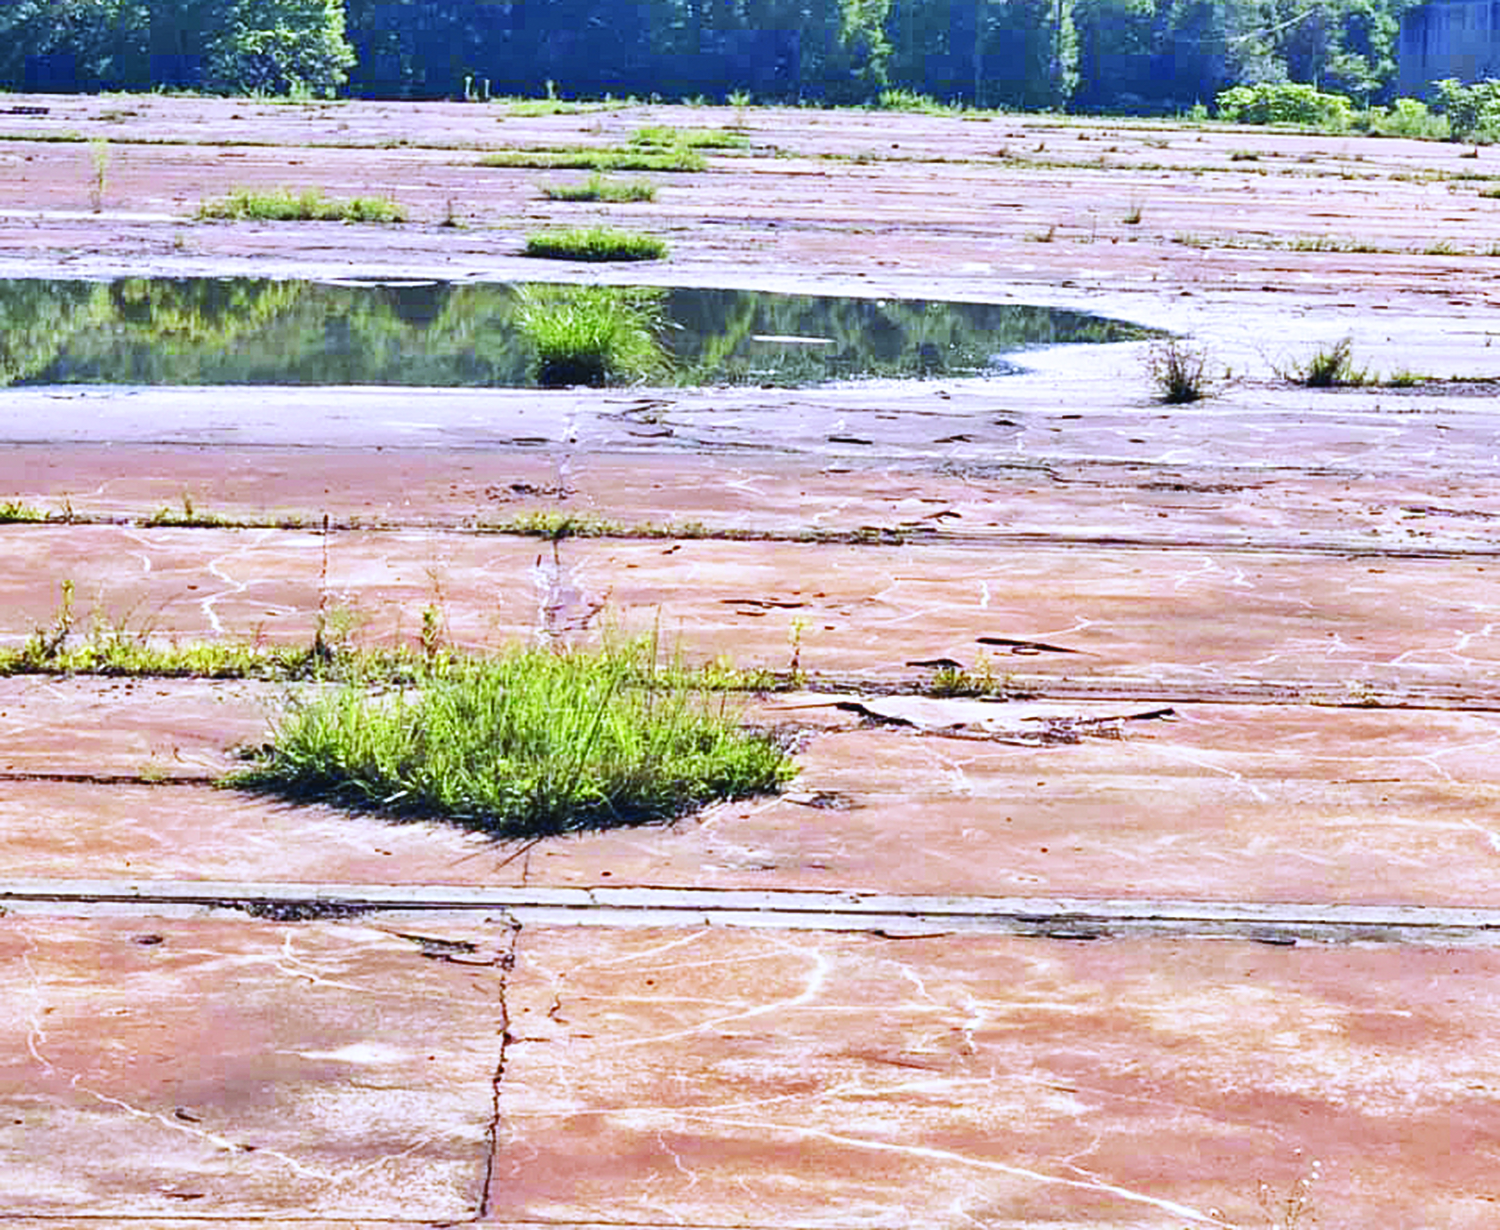 Mitchell County received a $97,500 grant to assist in the demolition and removal of 250,000 square-foot damaged and cracked concrete slab from the former Henredon manufacturing plant site. (Submitted)